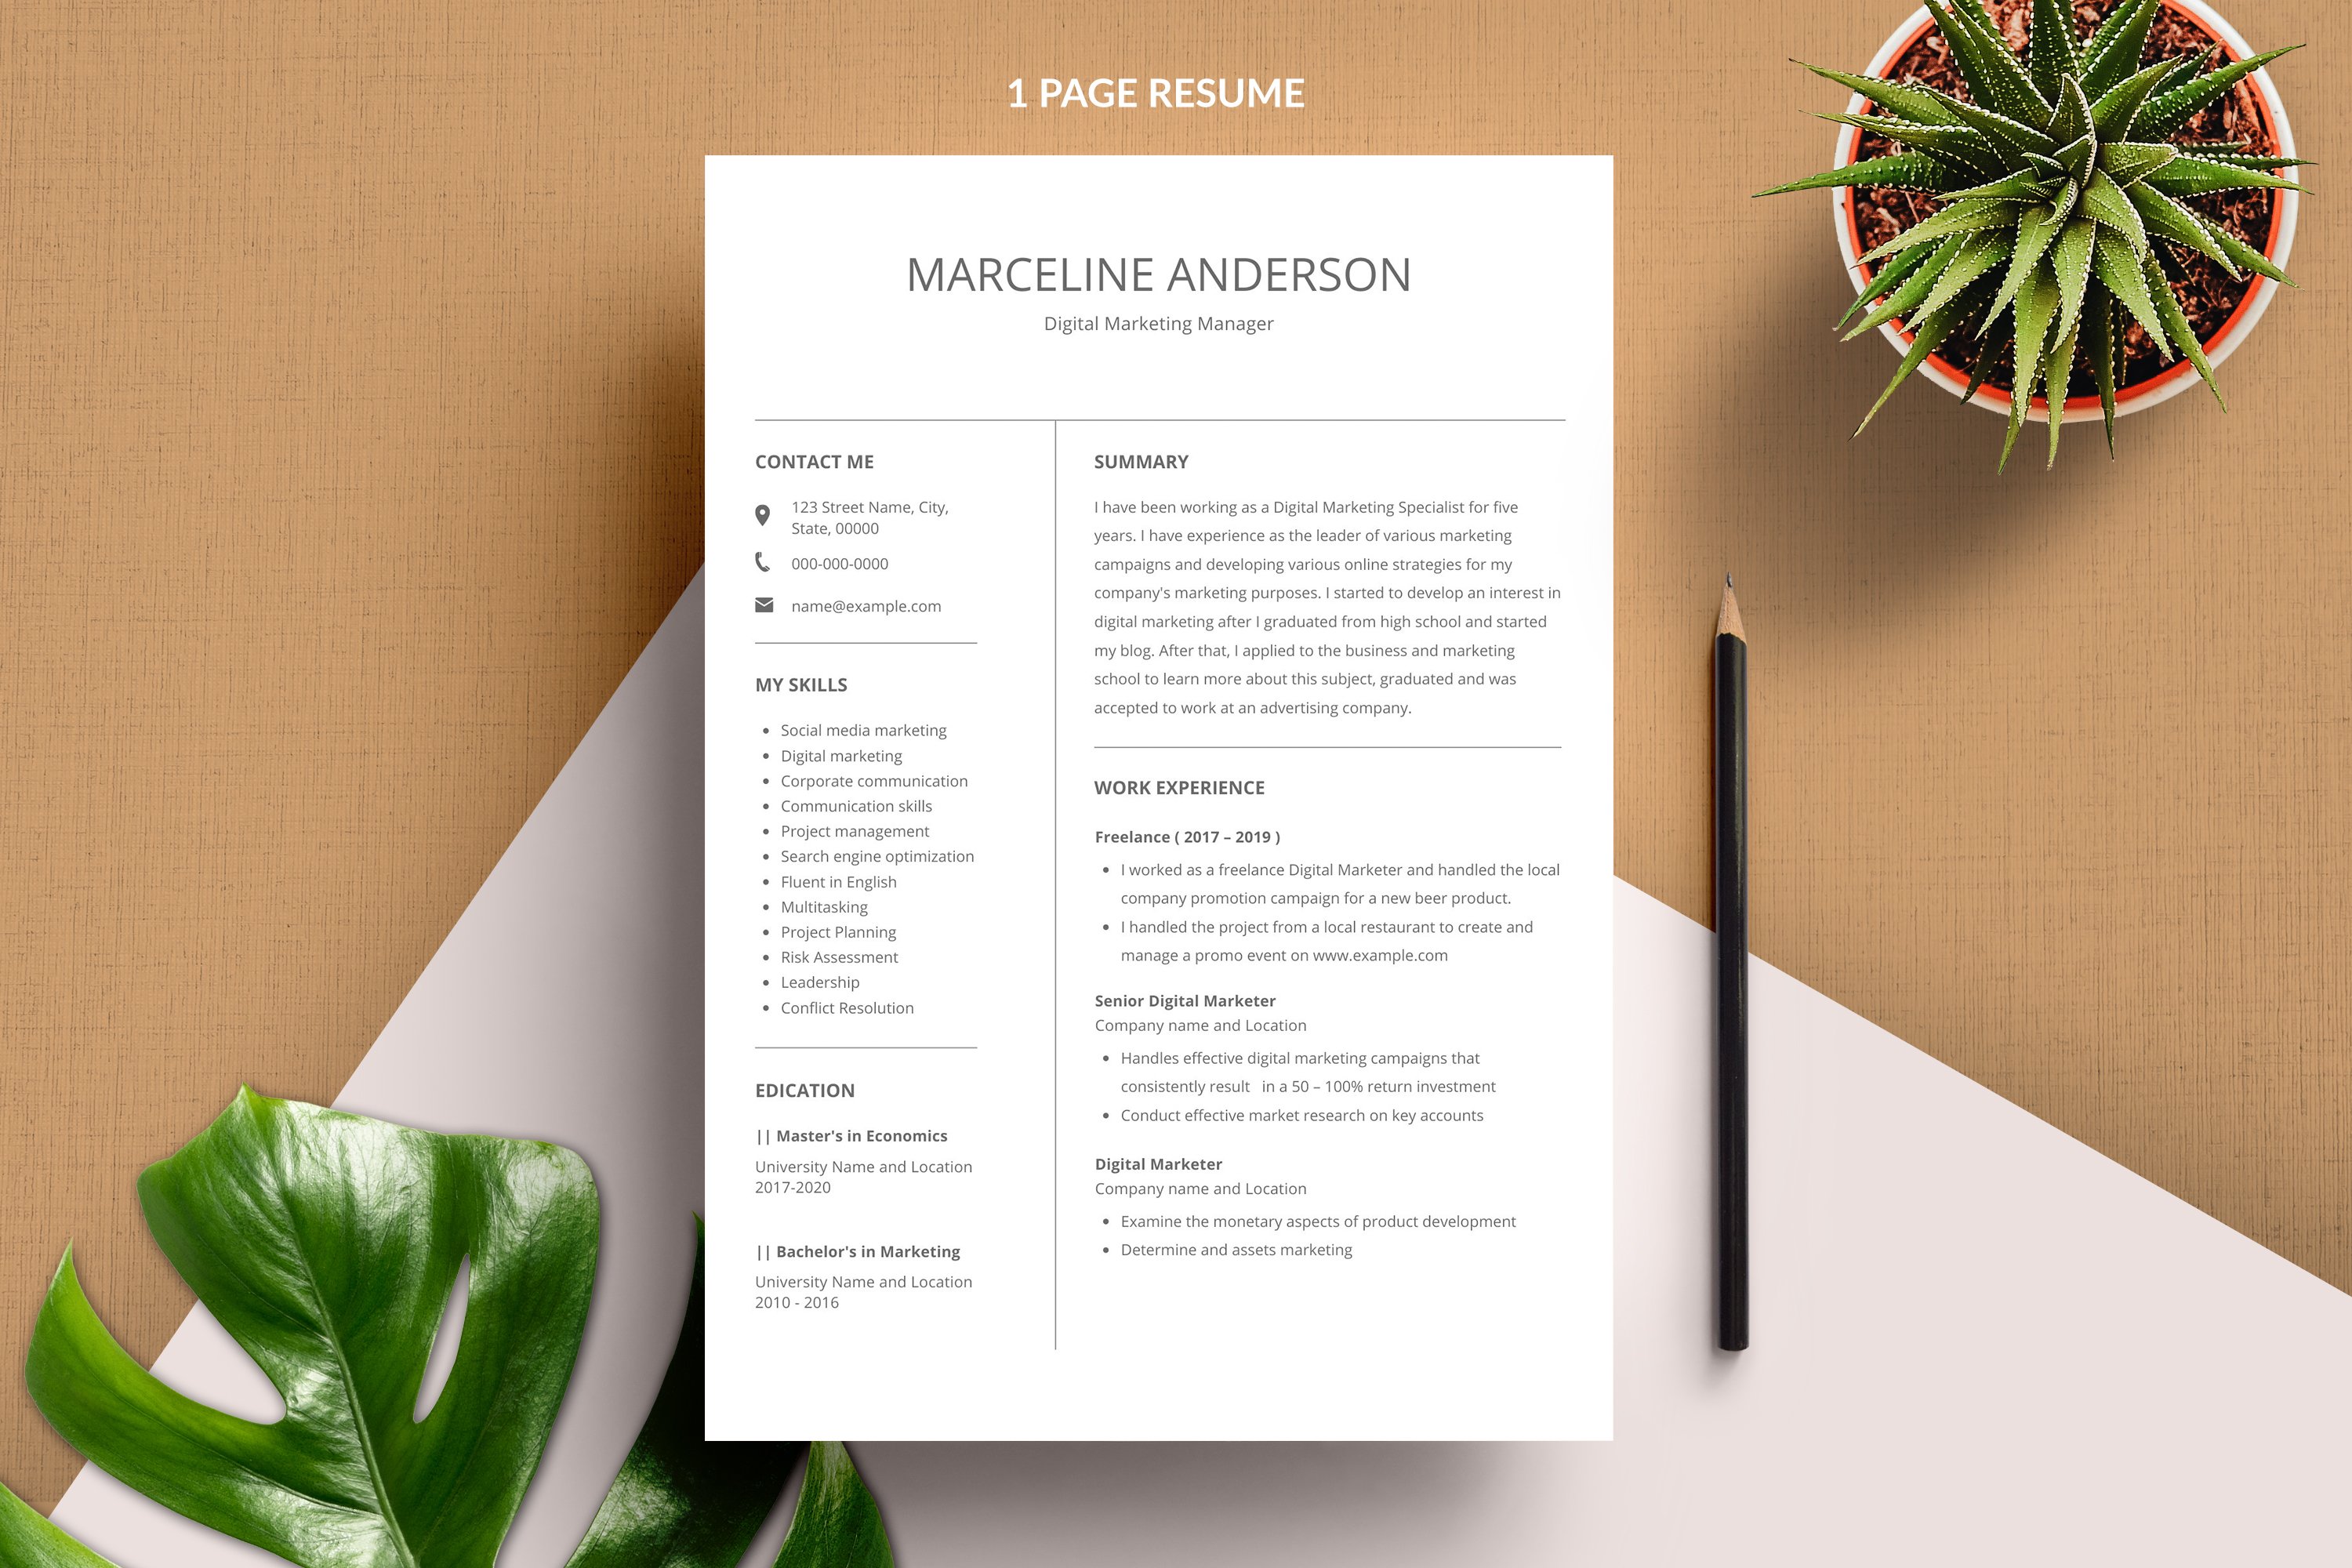 Minimal Resume for Marketing Manager cover image.